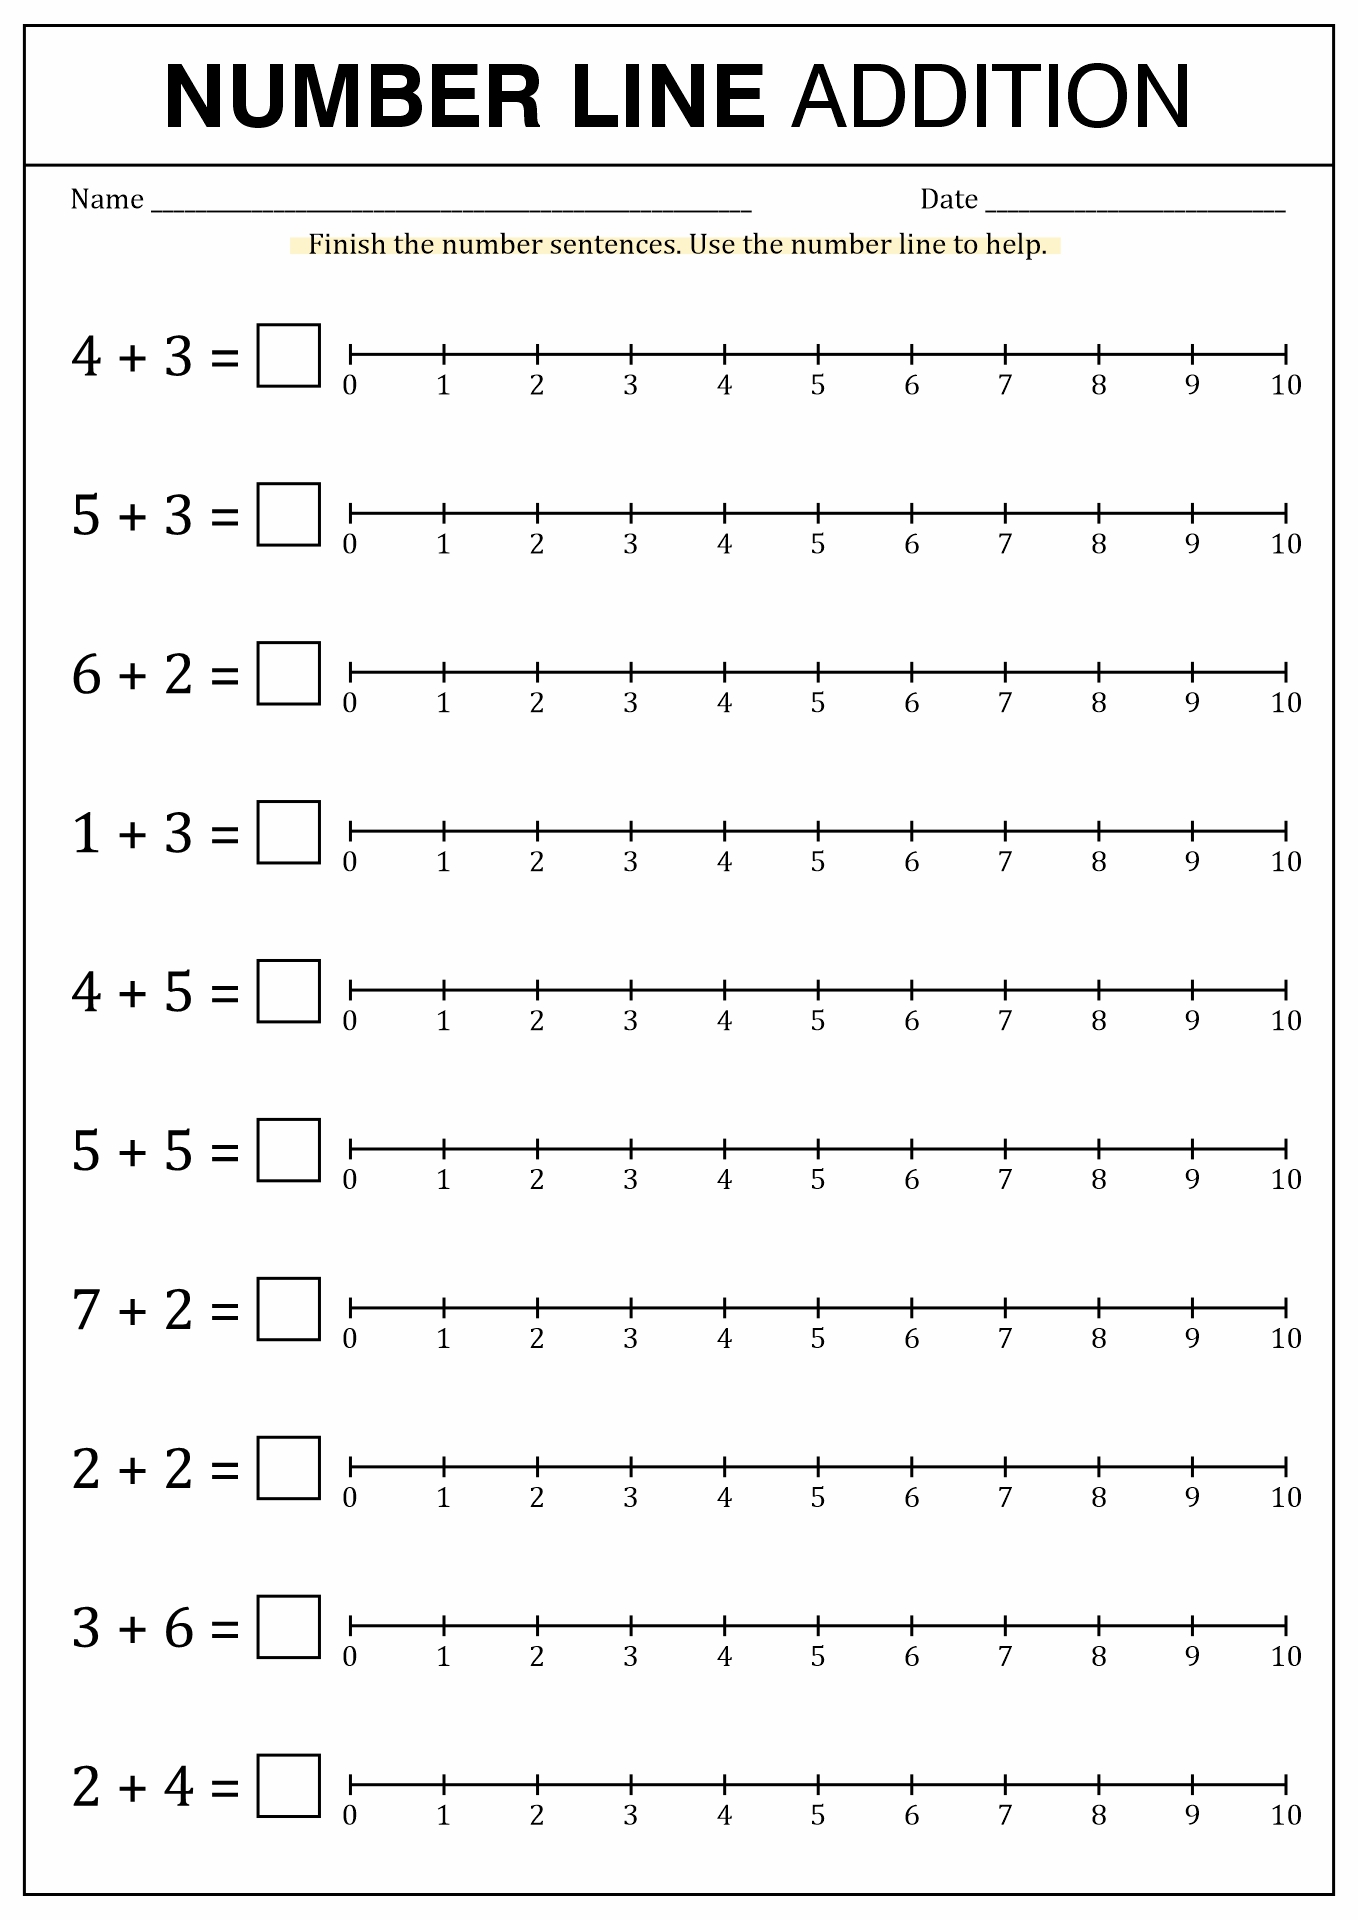 13-best-images-of-blank-place-value-worksheets-place-value-chart-with-decimals-place-value